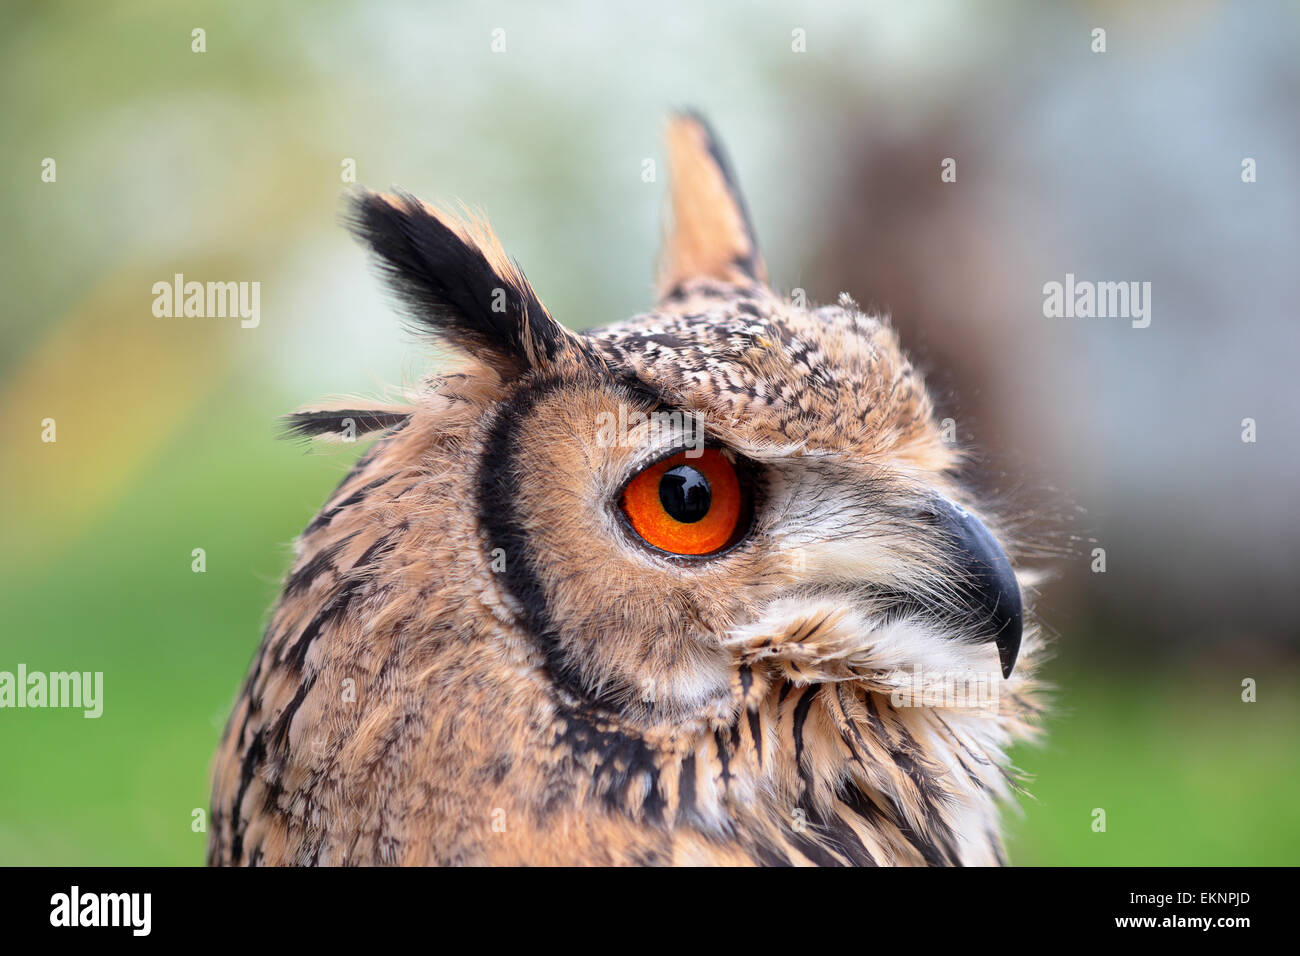 Portrait of an indian eagle-owl, also called the rock eagle-owl or Bengal eagle-owl, Bubo bengalensis, looking ahead Stock Photo